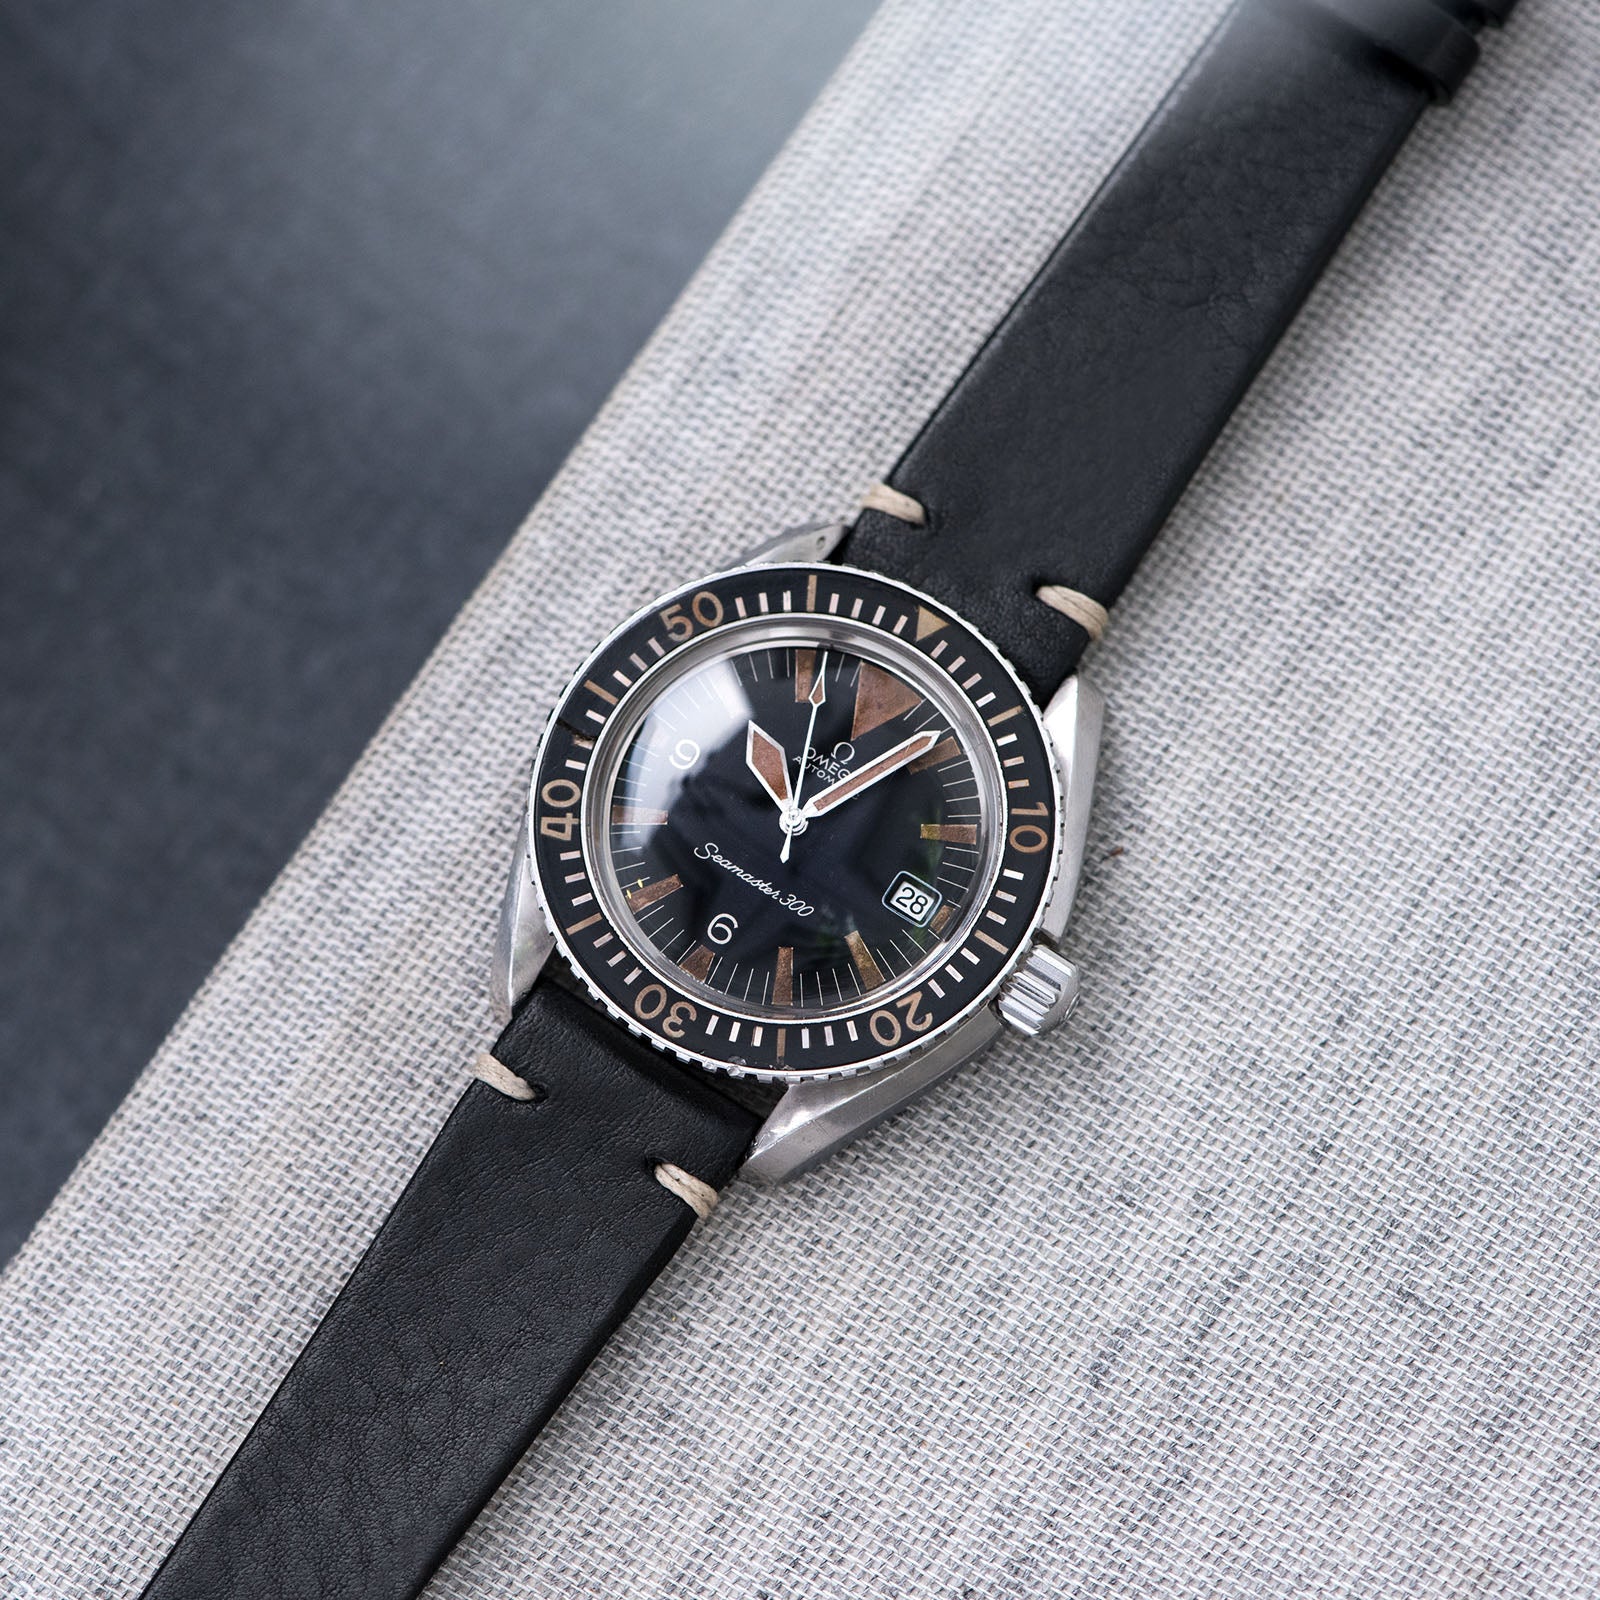 Bulang and Sons_Strap Guide_The omega SM 300 Seamaster_Black Leather Watch Strap